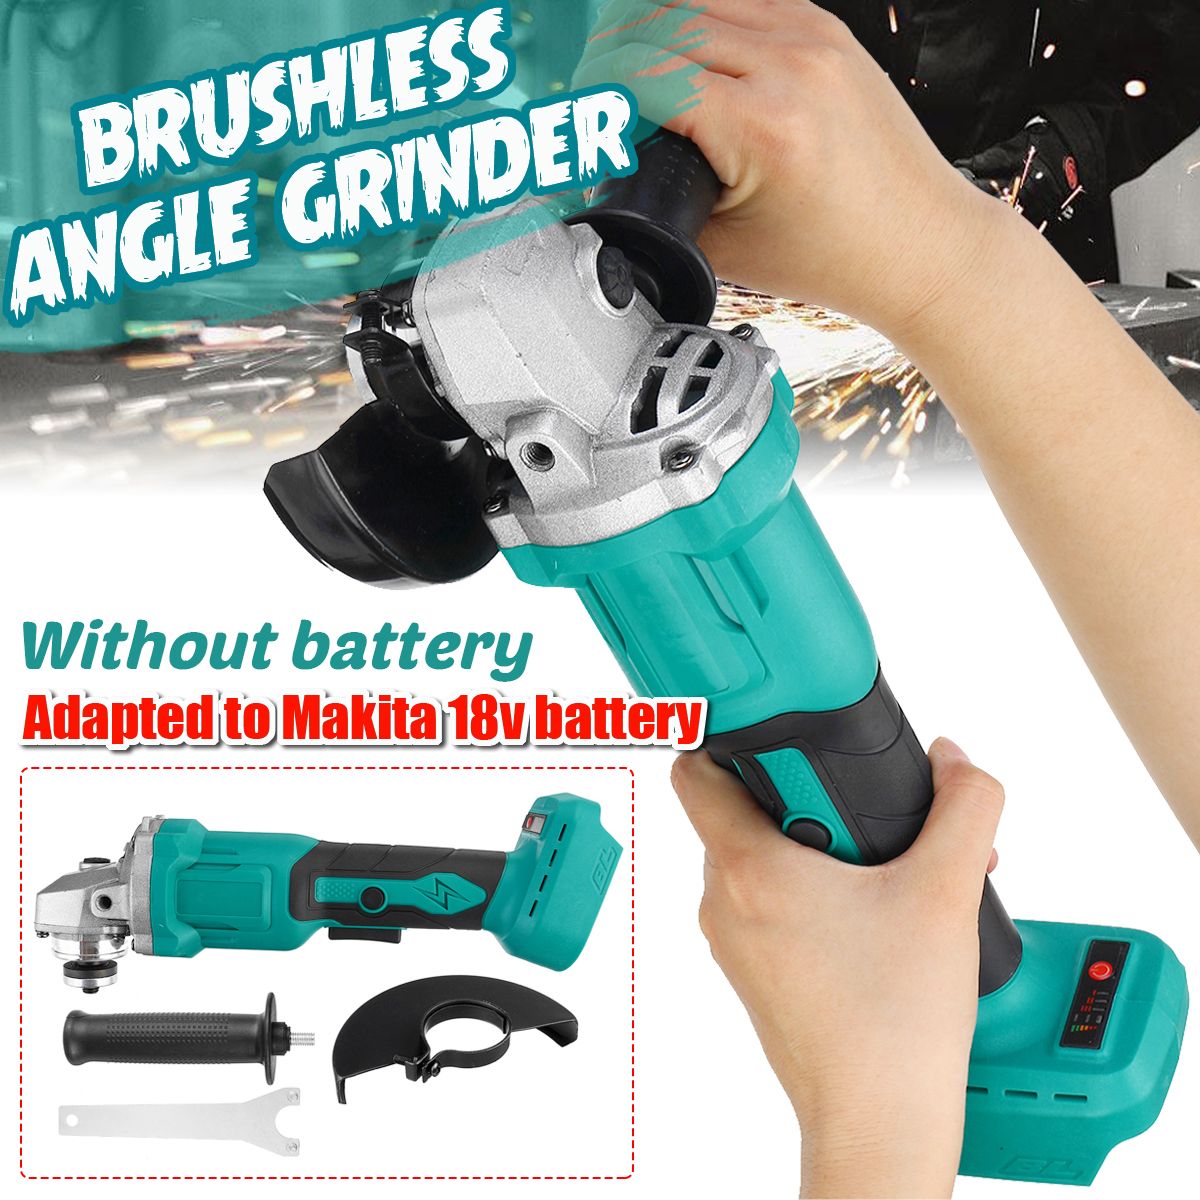 100mm-Brushless-Electric-Angle-Grinder-Grinding-Machine-Cordless-DIY-Woodworking-Power-Tool-1764625